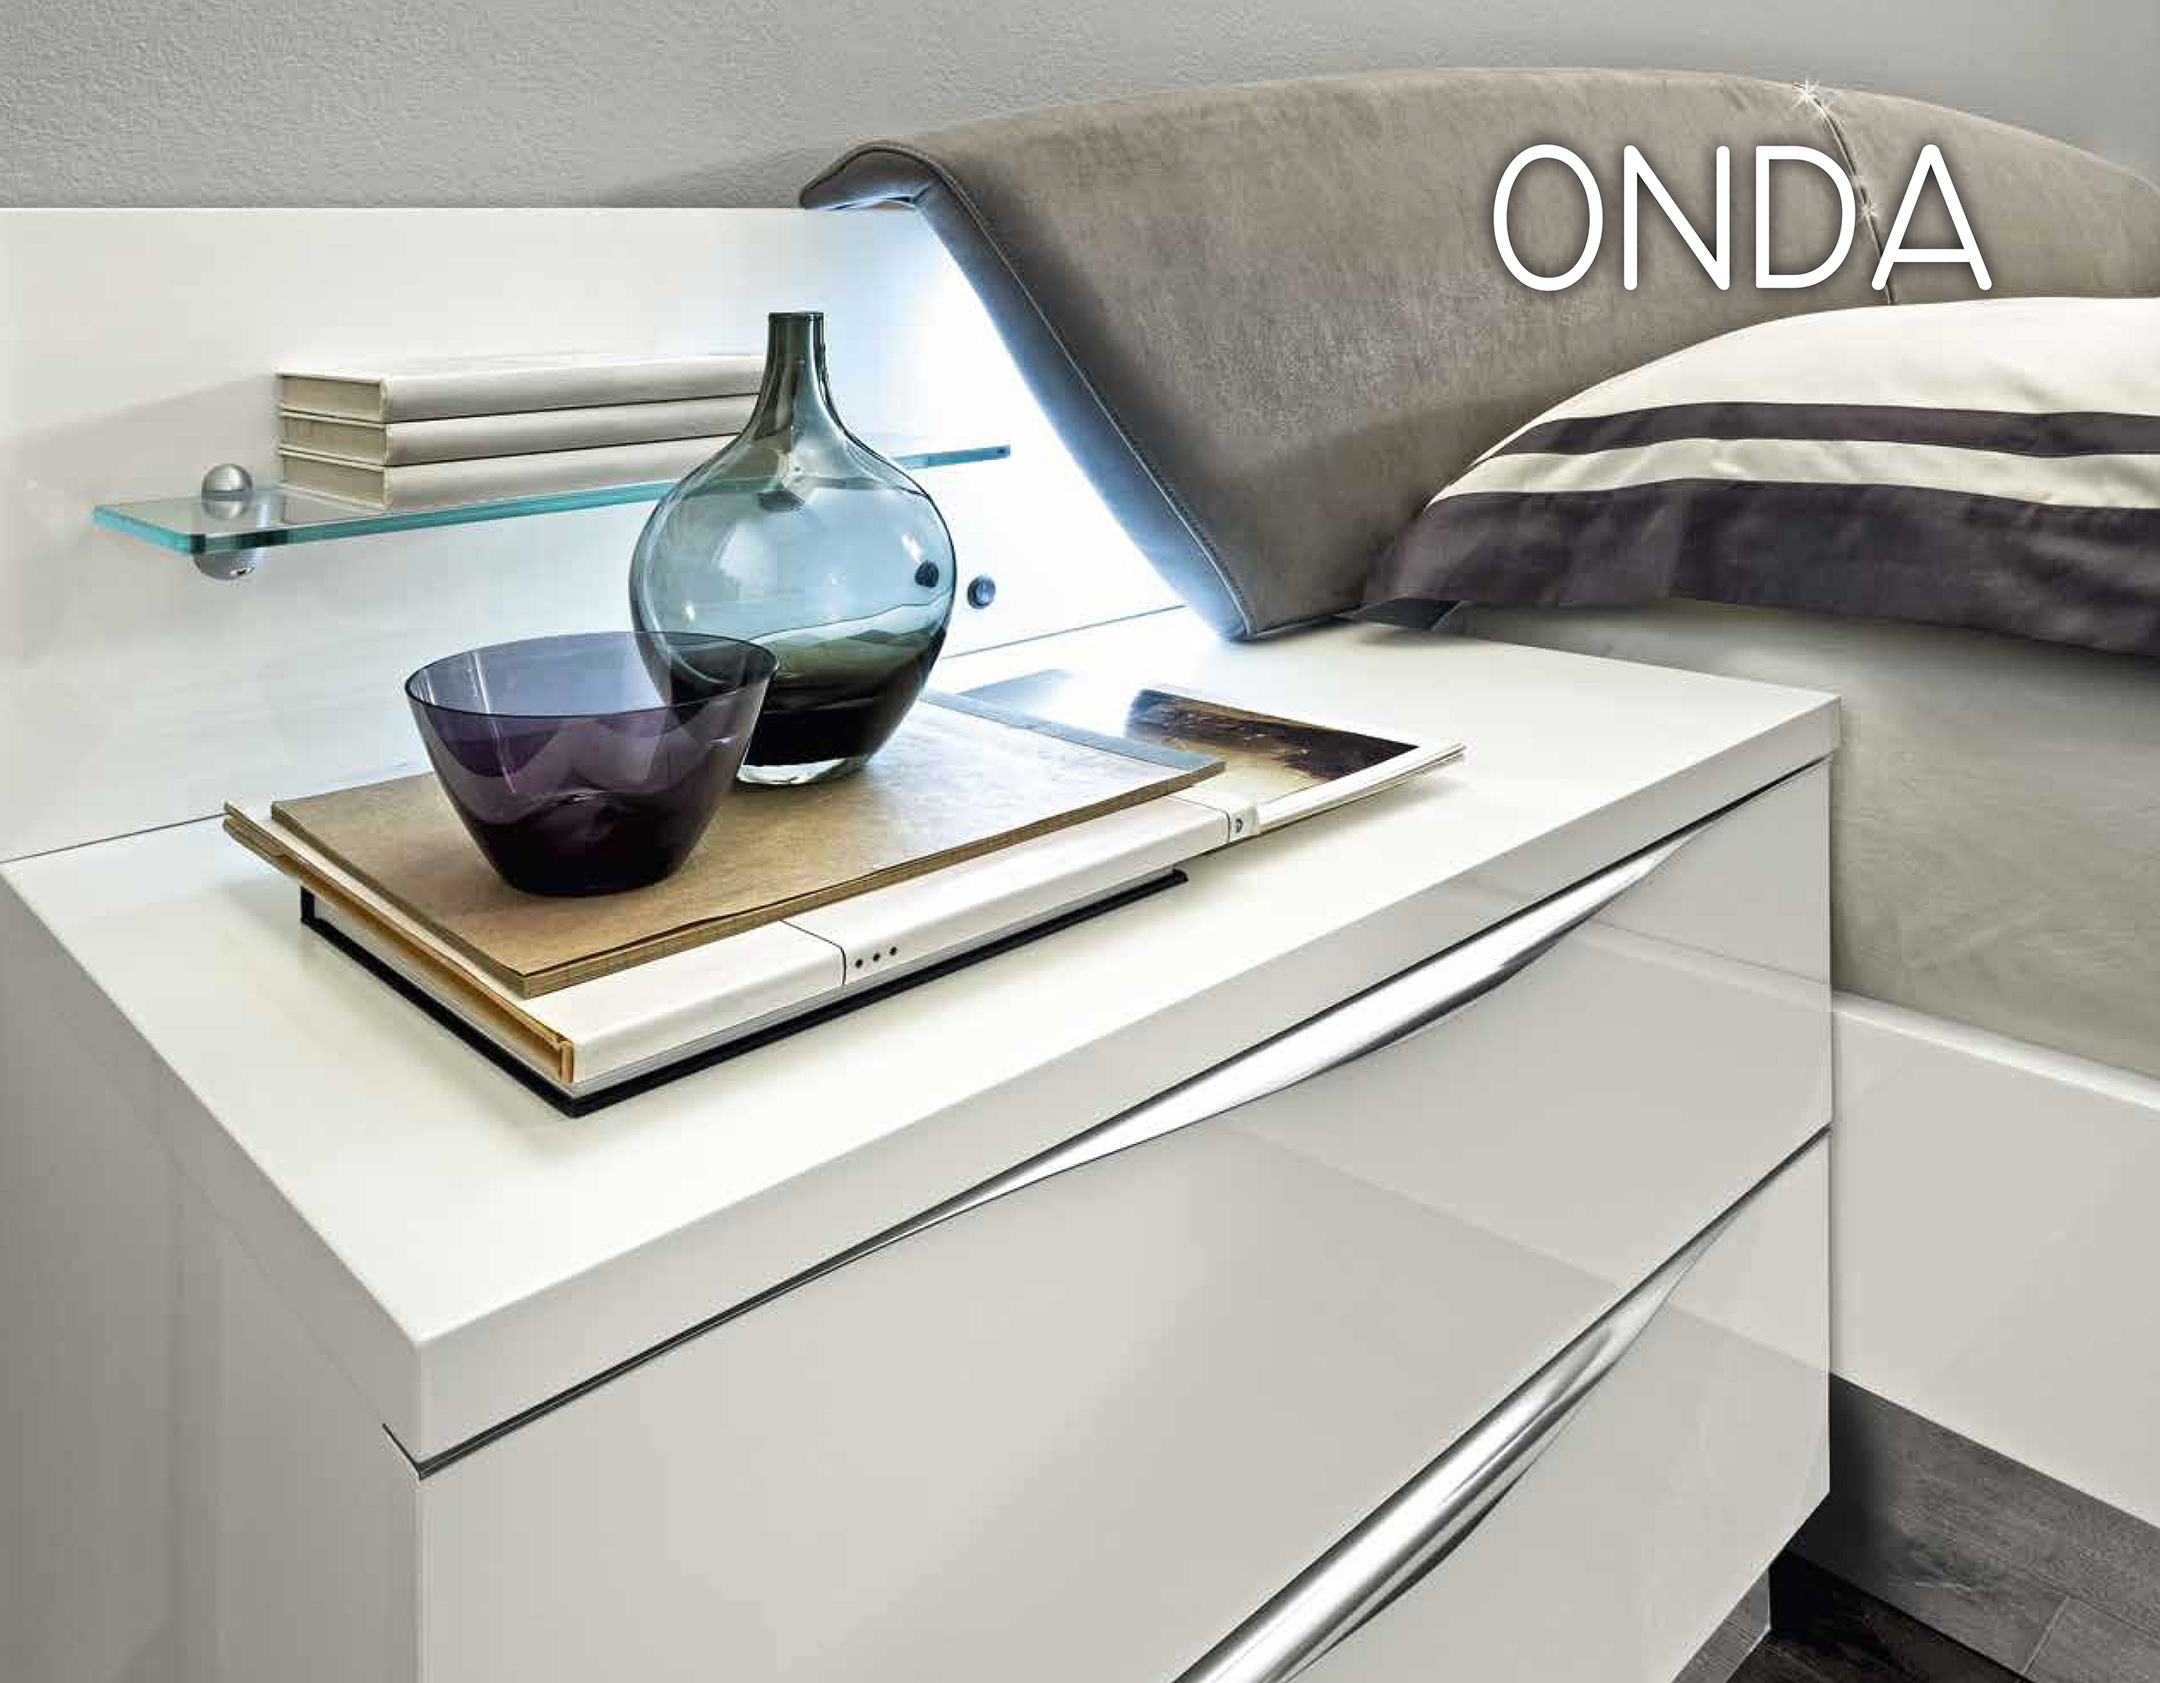 Bedroom Furniture Beds with storage Onda White Additional Items